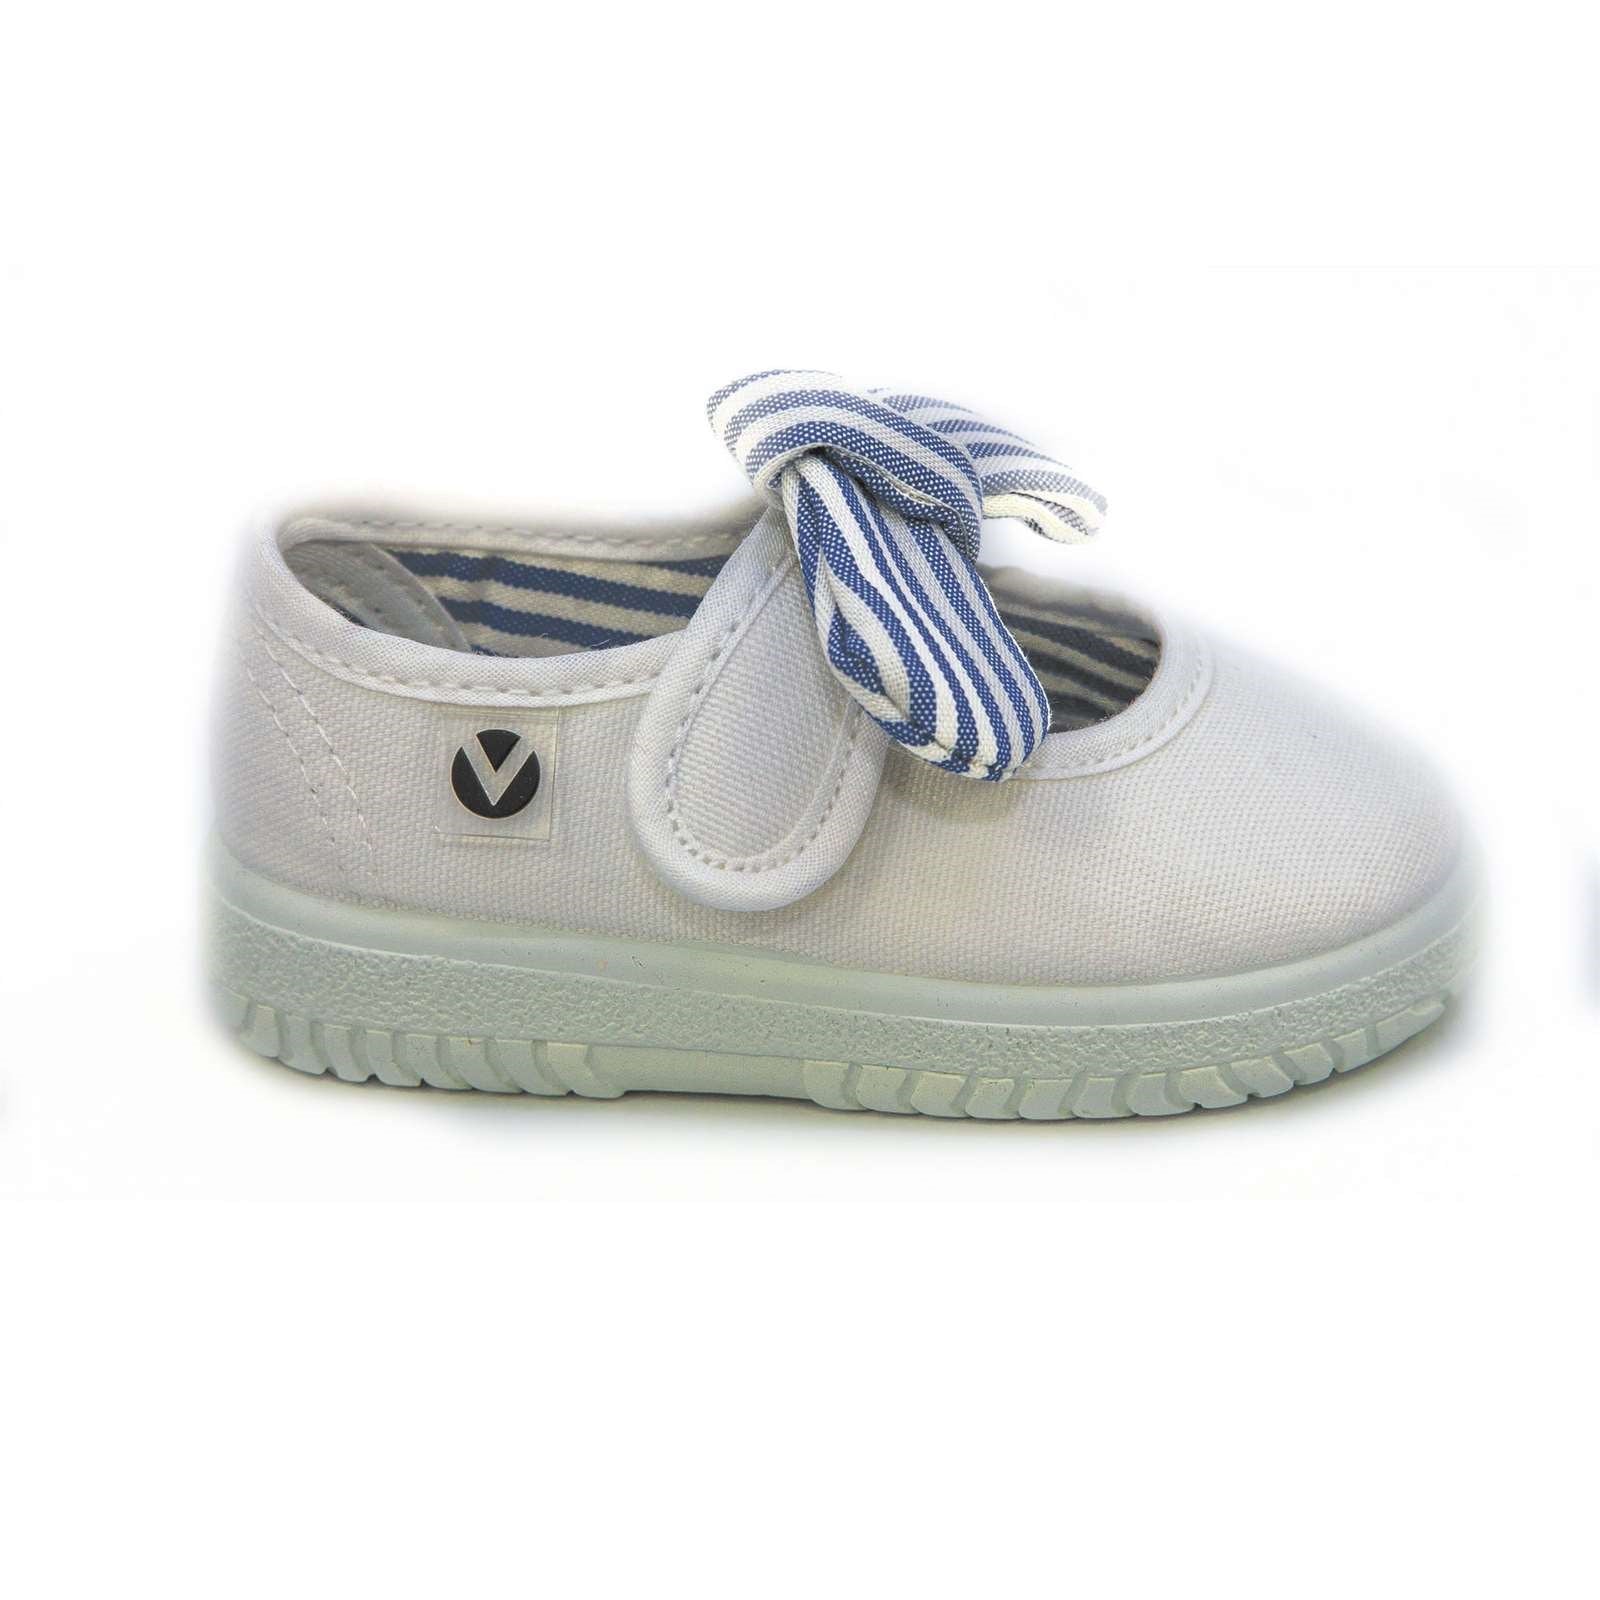 Victoria Girl Slip On Canvas Bow Shoes